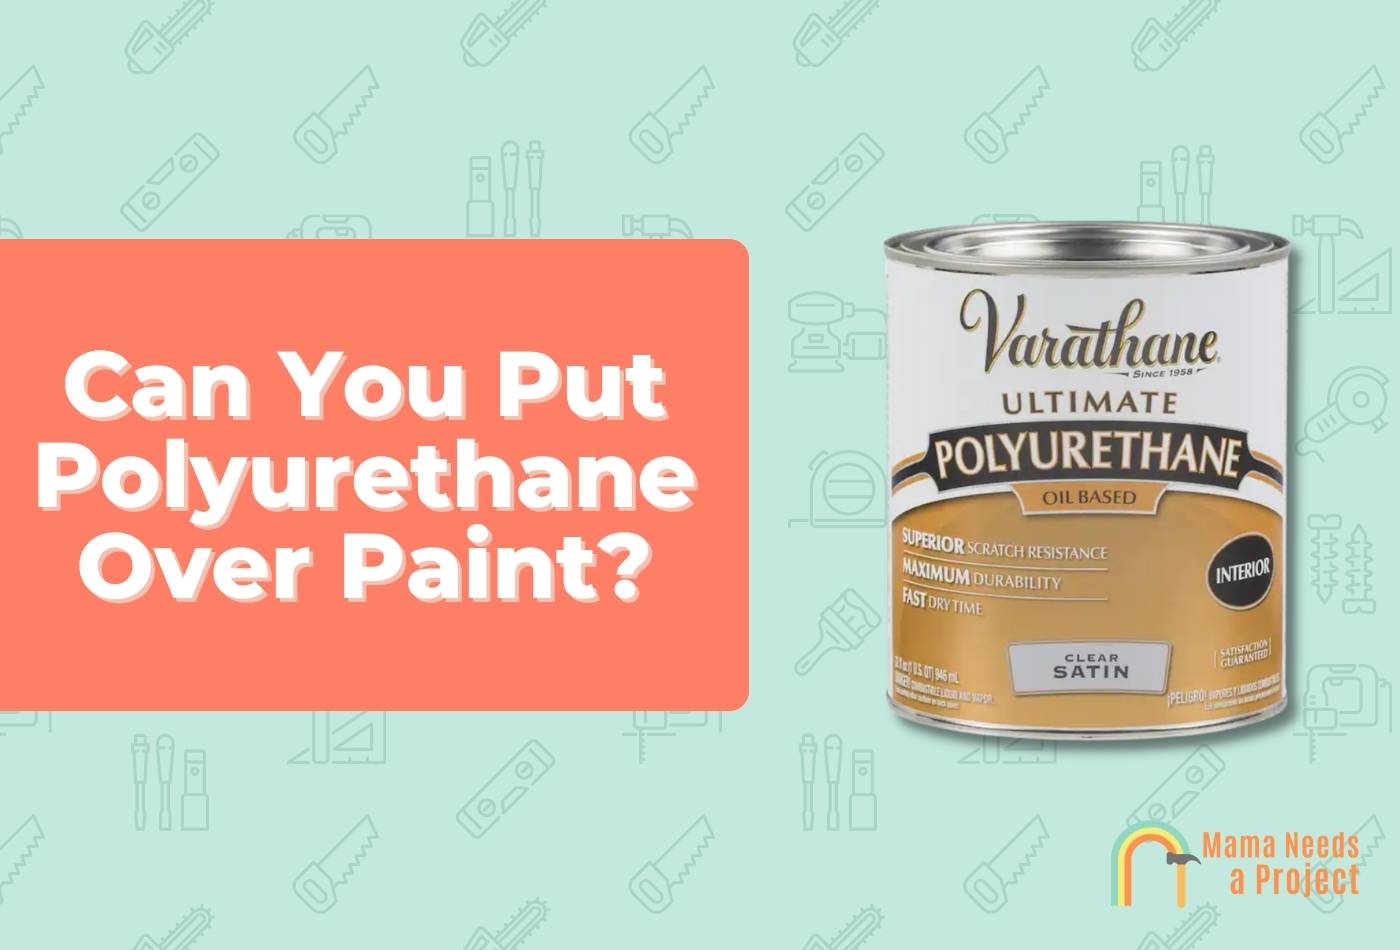 Can You Put Polyurethane Over Paint